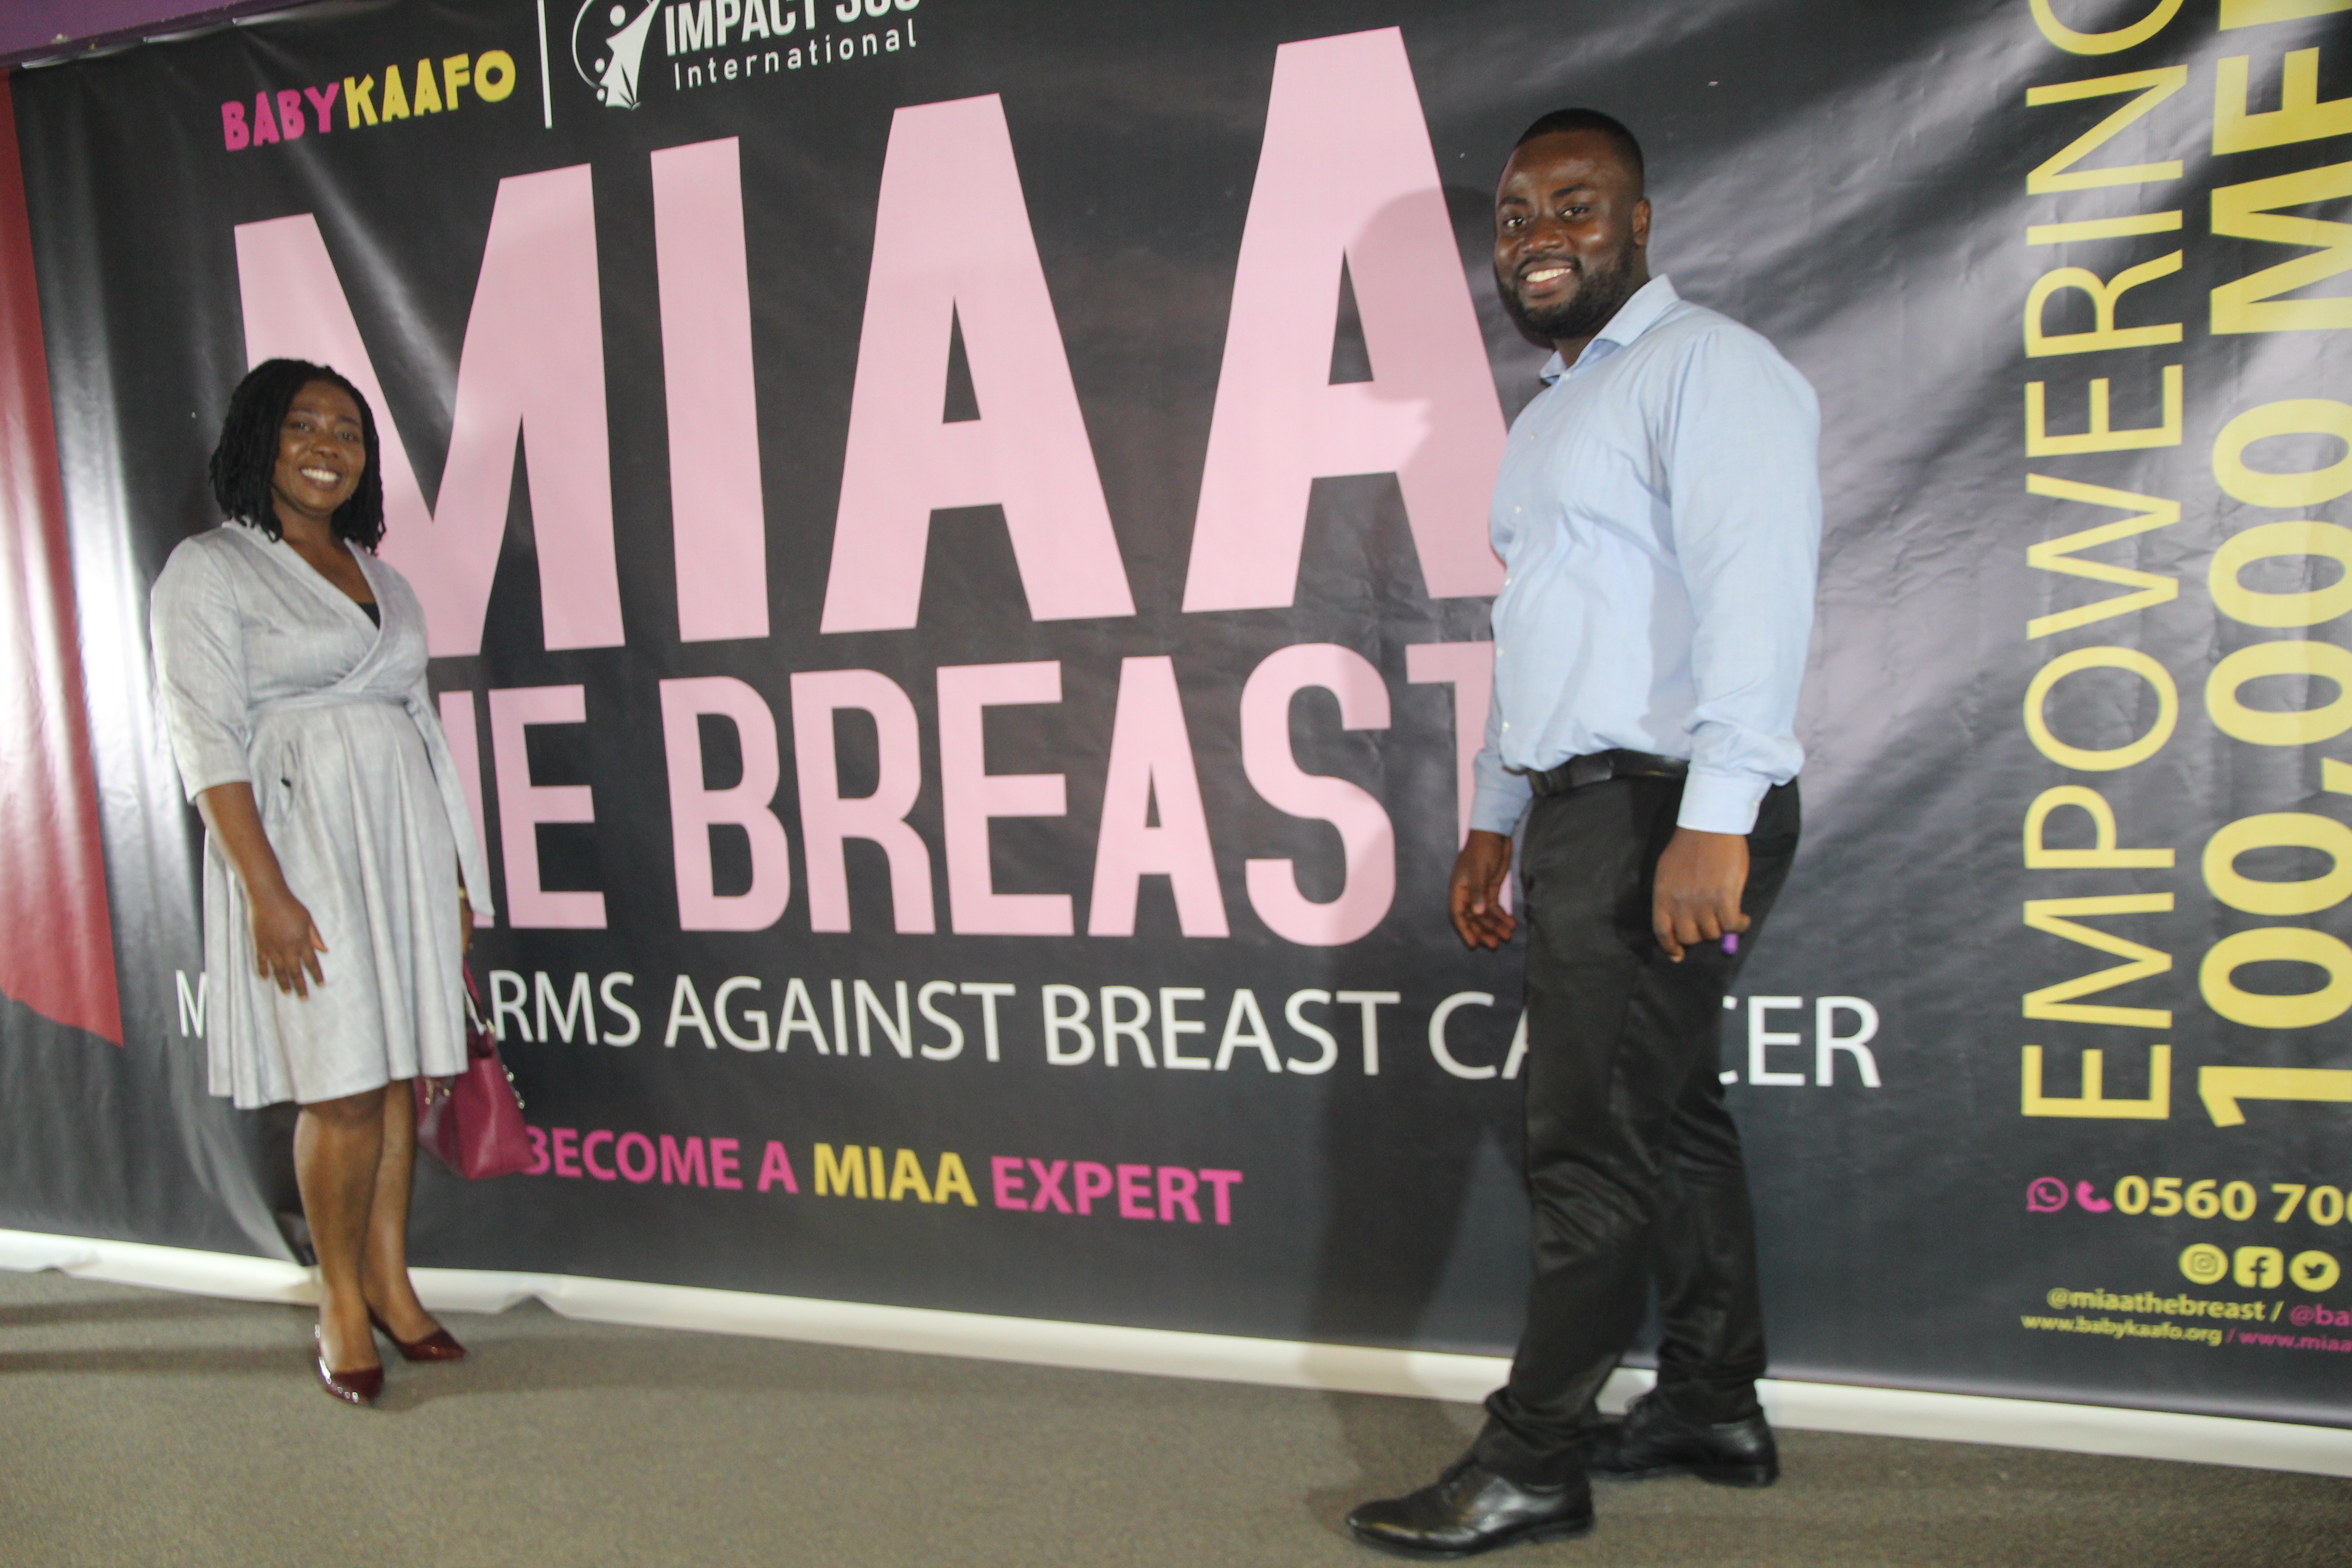 "MIAA" breasts campaign empowers men to examine women for breast cancer